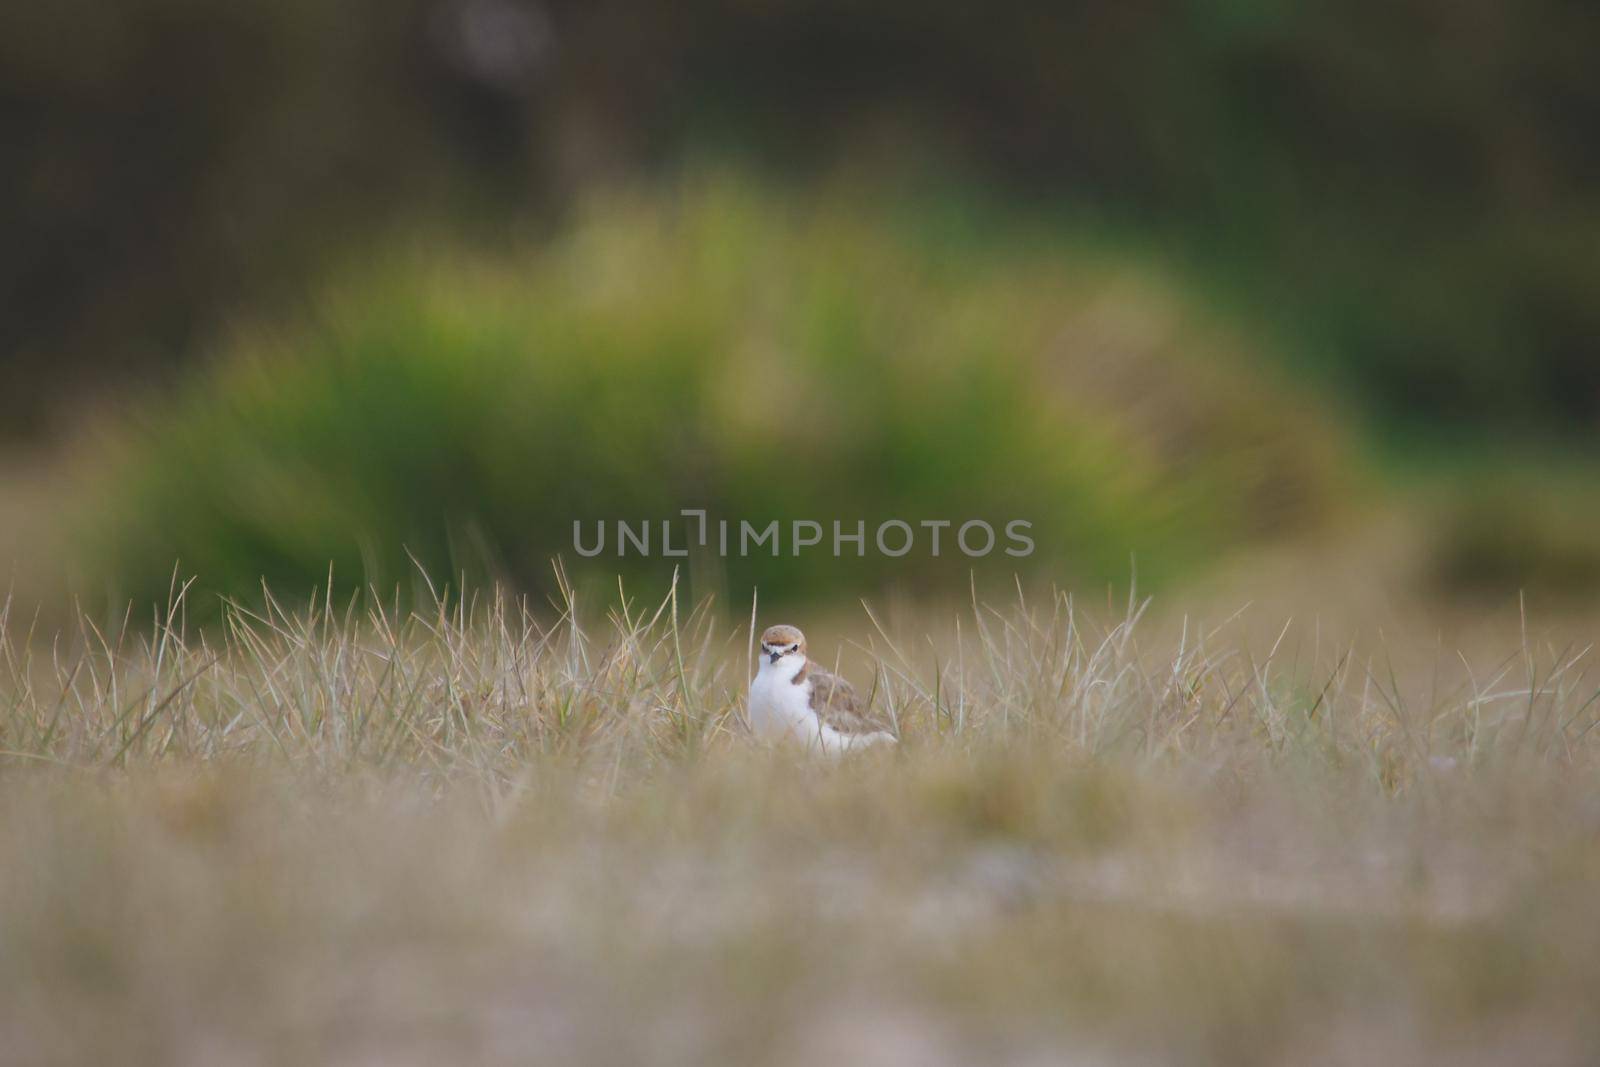 Red-capped plover ~ Charadrius ruficapillus ~ also known as the red-capped dotterel. High quality photo